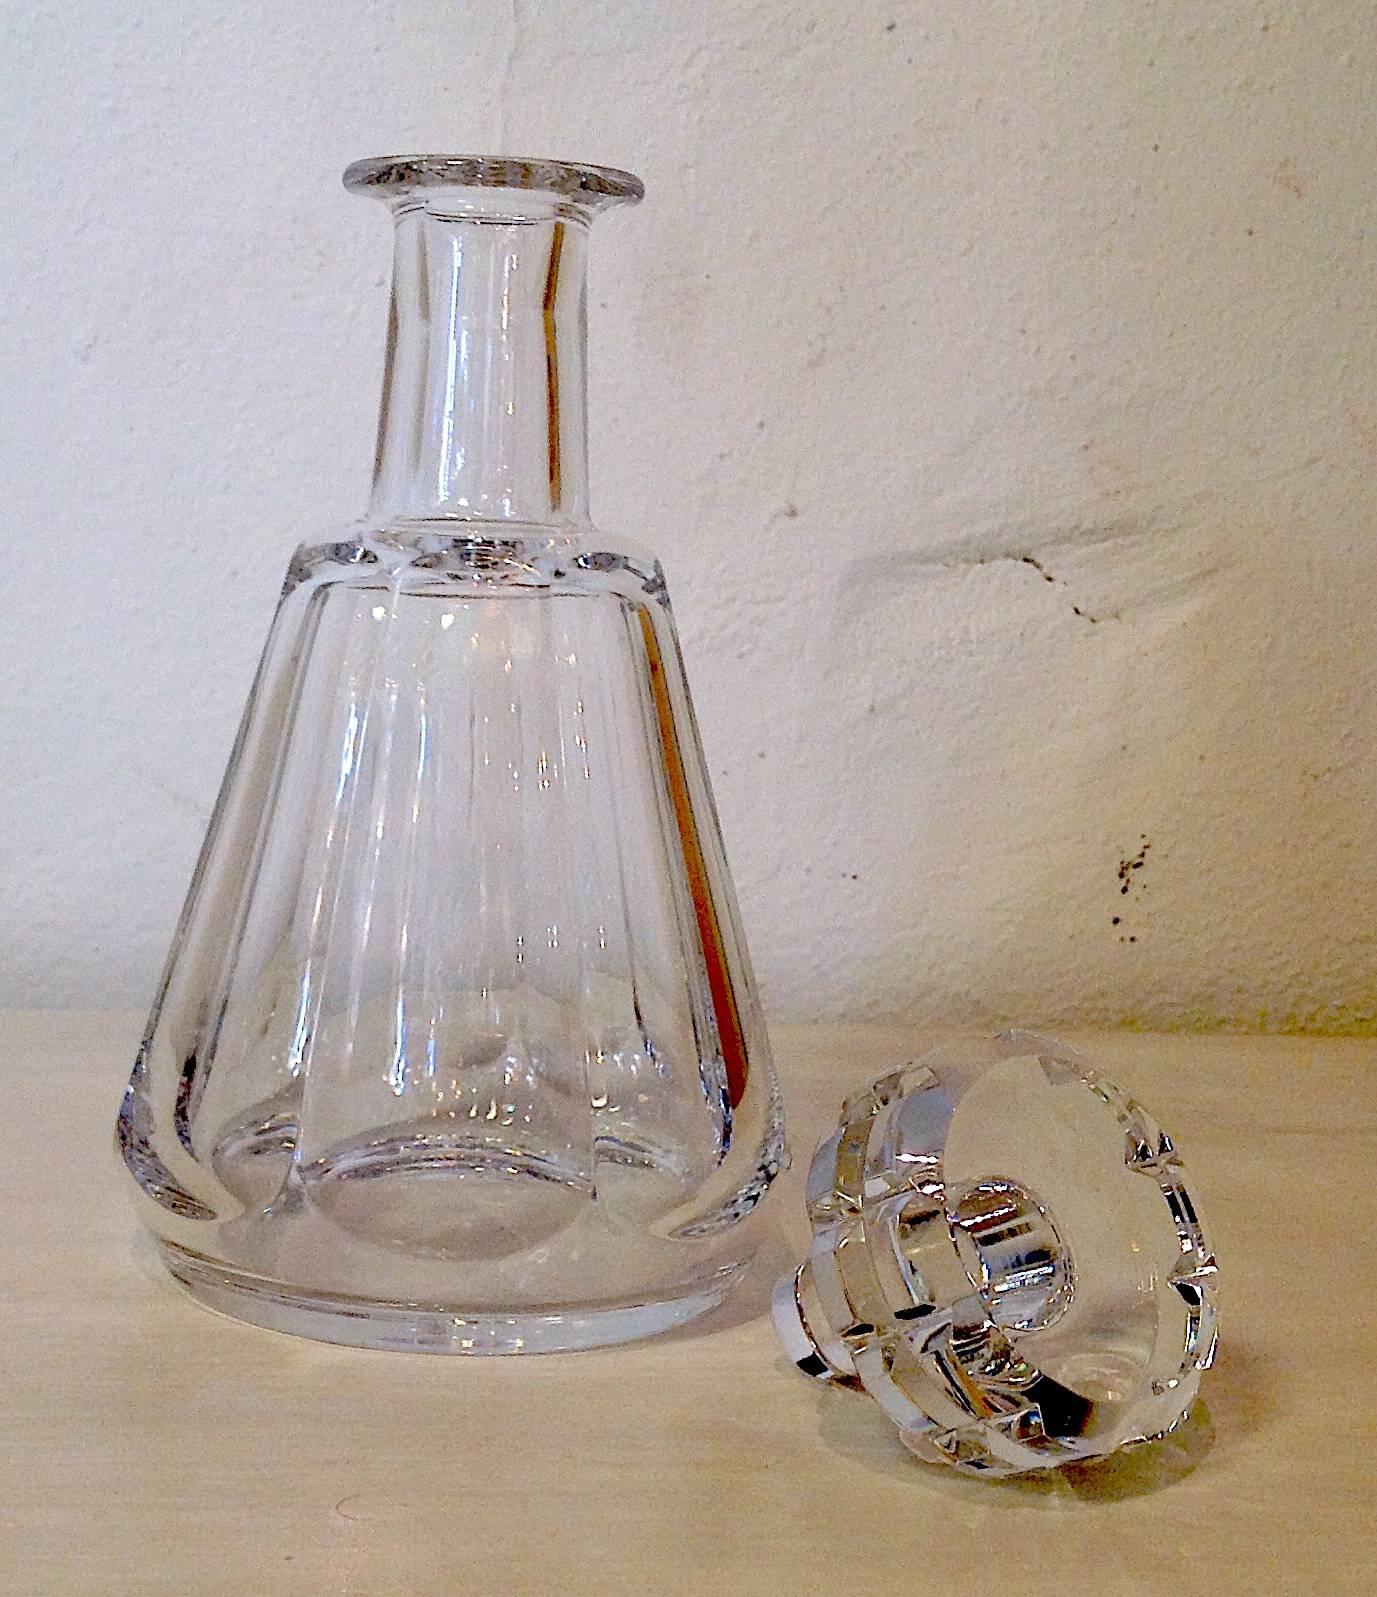 Antique Baccarat crystal French paneled cordial decanter and stopper in Tallyrand pattern, measures 9.5 inches high and 5 inches wide. Beautiful French paneled cut. Excellent condition. Etched on bottom with Baccarat signature.